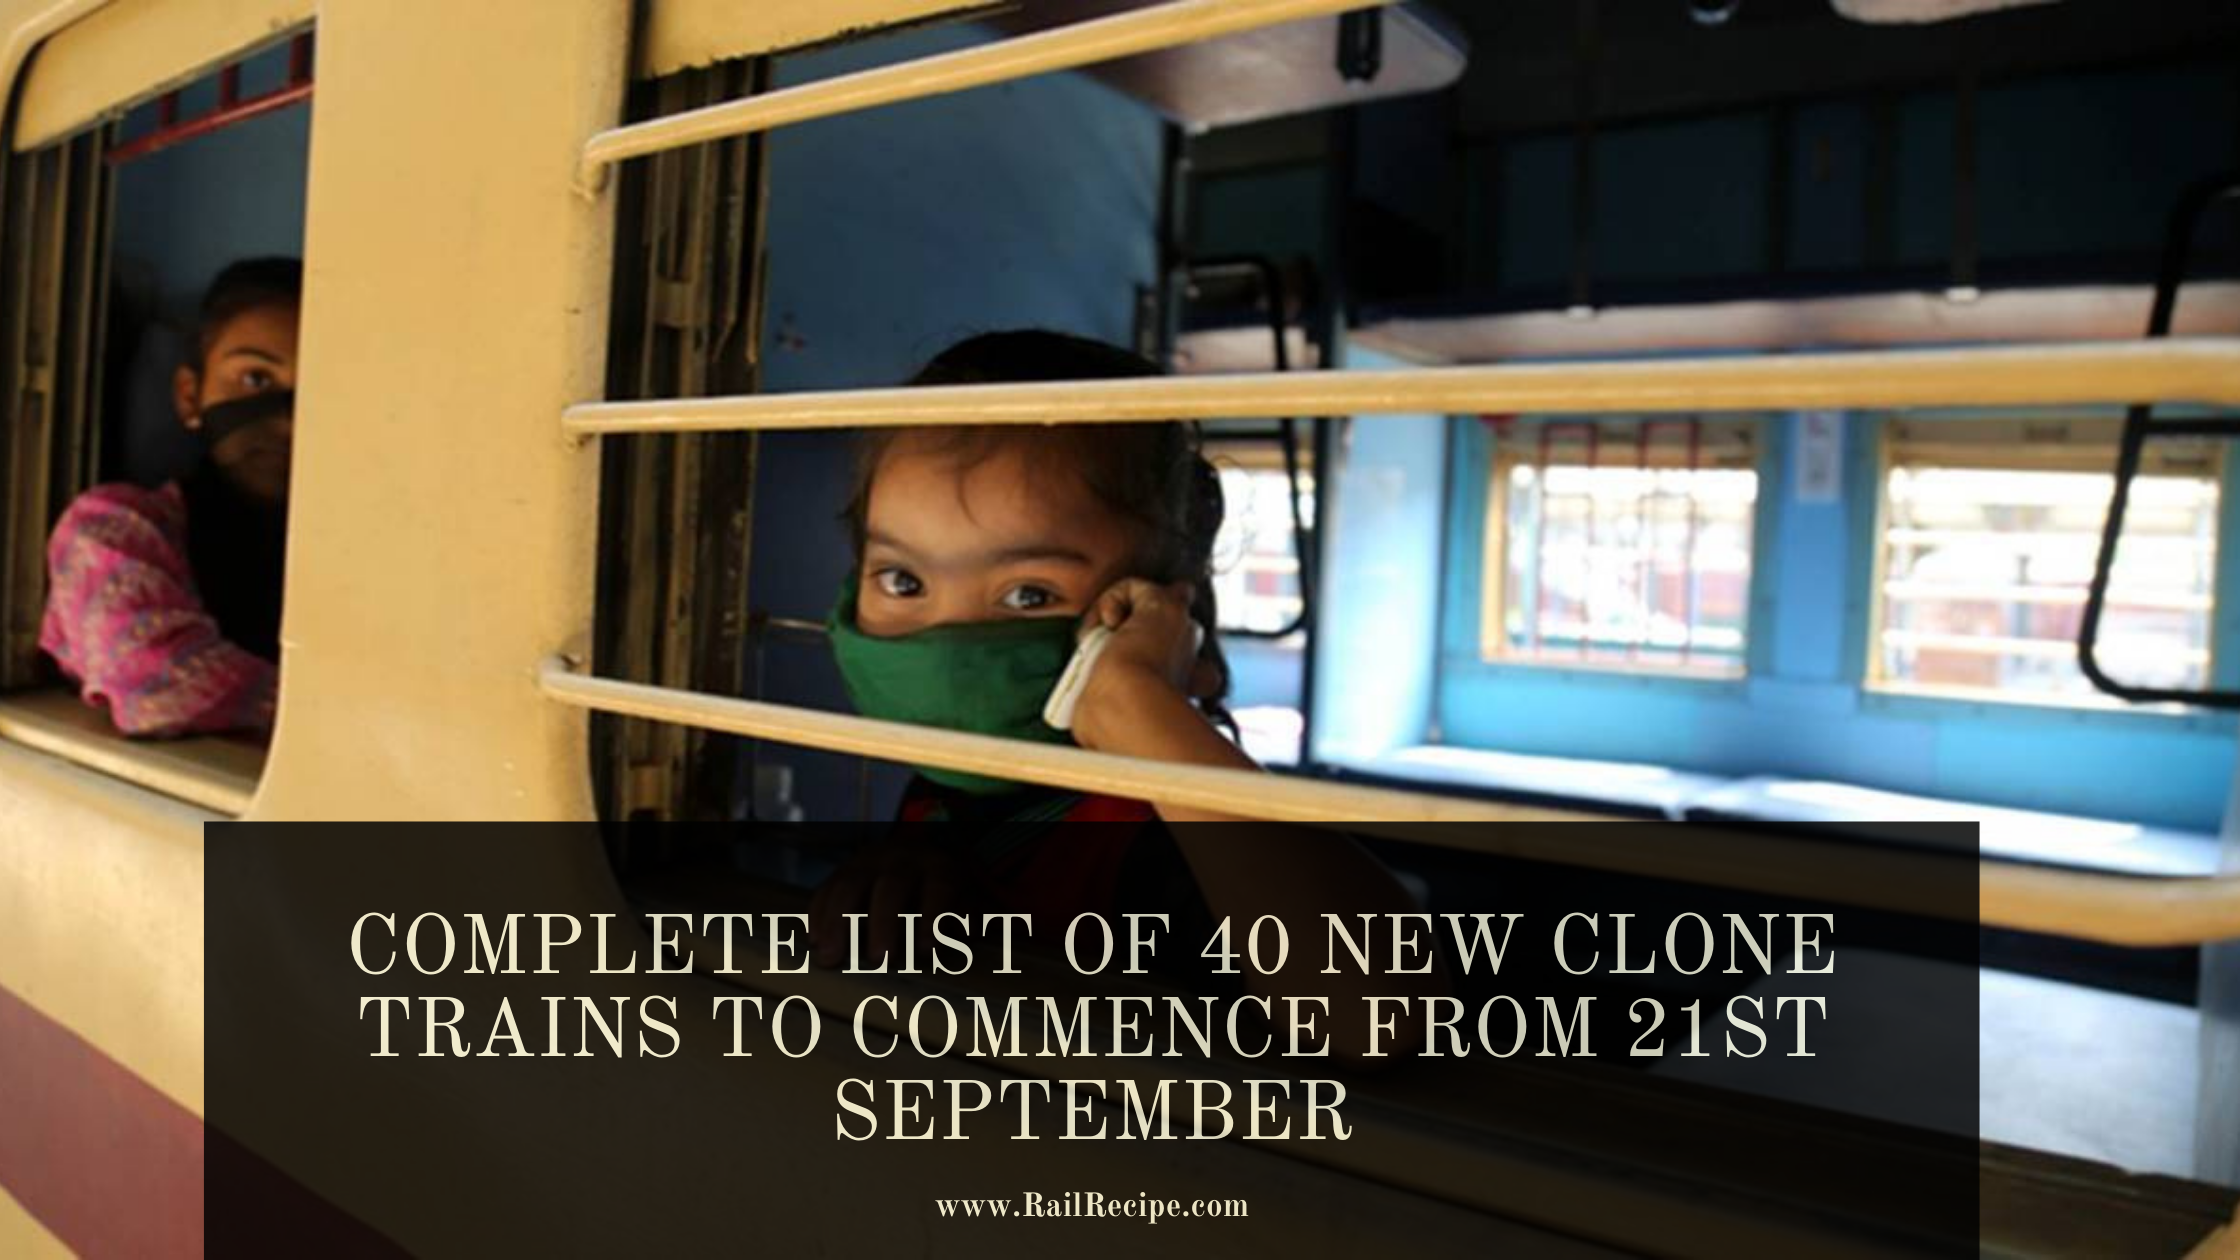 Complete List of 40 New Clone Trains To Commence From 21st September